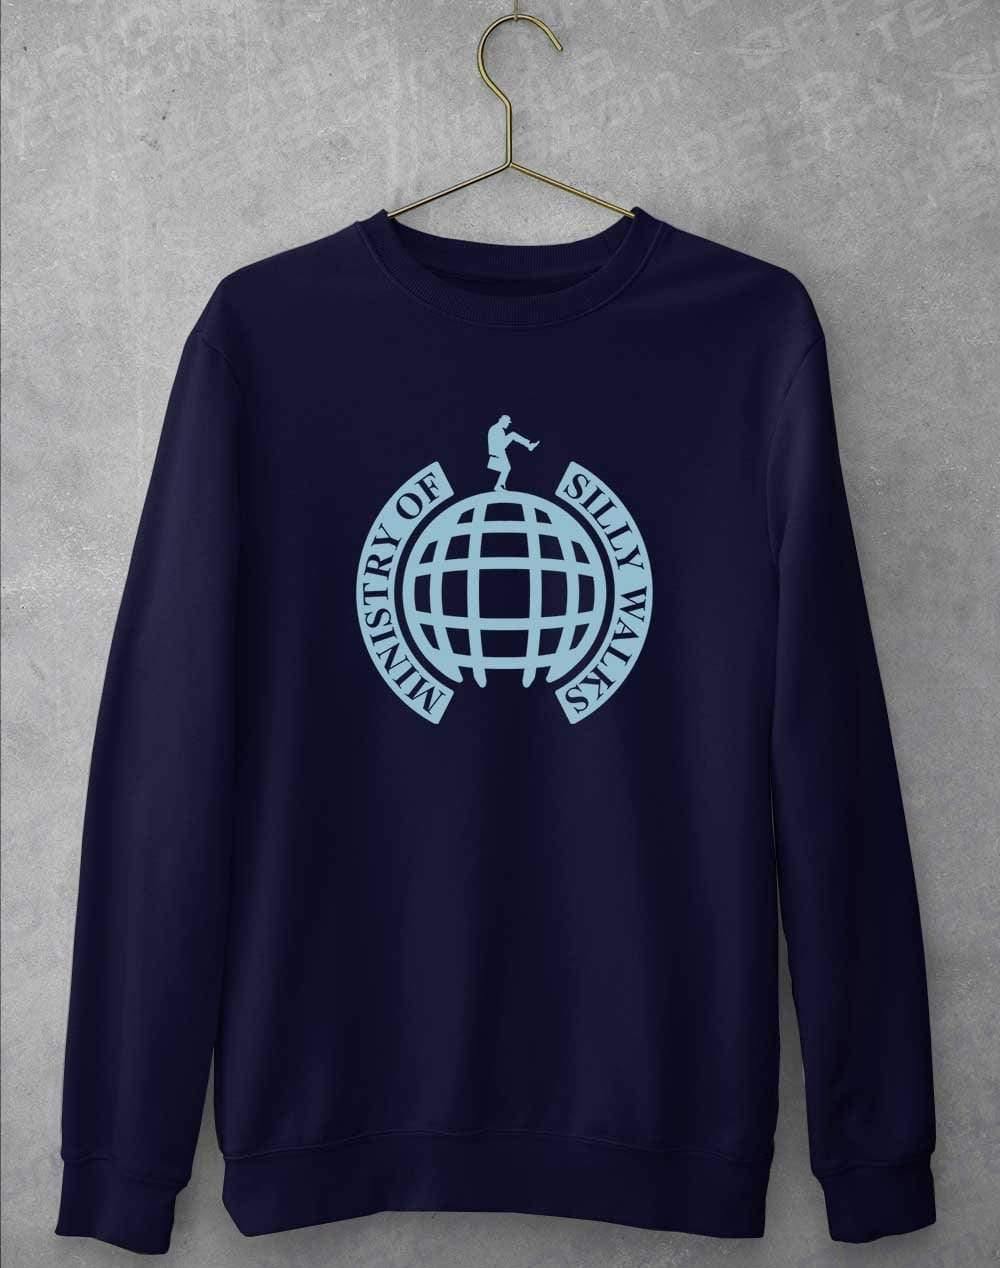 Ministry of Silly Walks Sweatshirt S / Oxford Navy  - Off World Tees